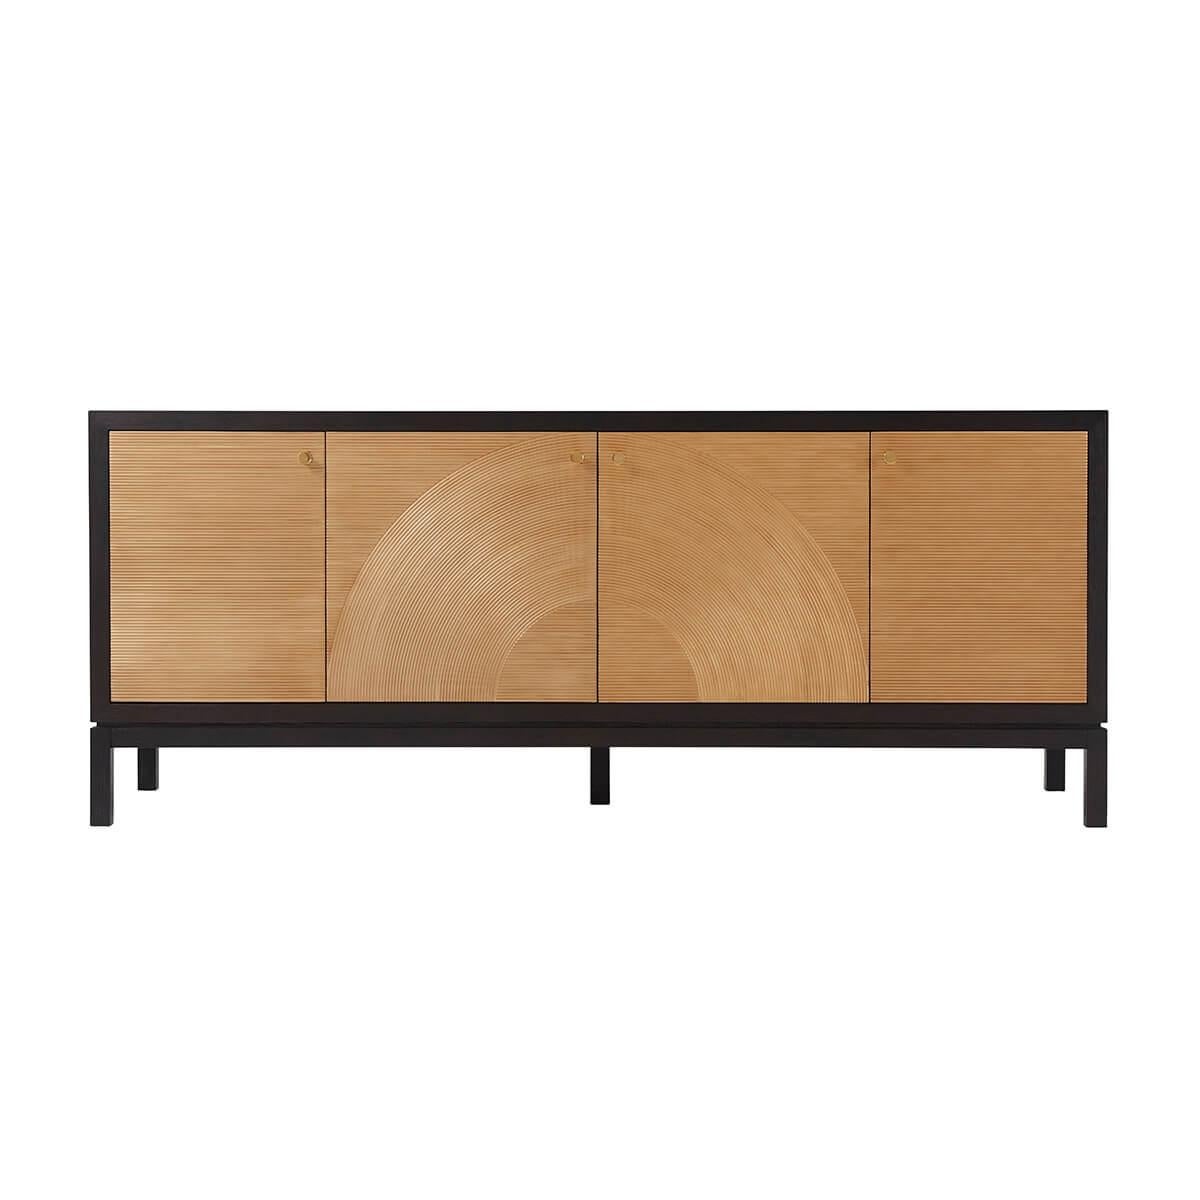 Bold contrasting frame and four doors, featuring brass handles and a triple-section interior fitted with adjustable shelves. With a nod to the inspired mid-century design of the 1960s.

Dimensions: 78